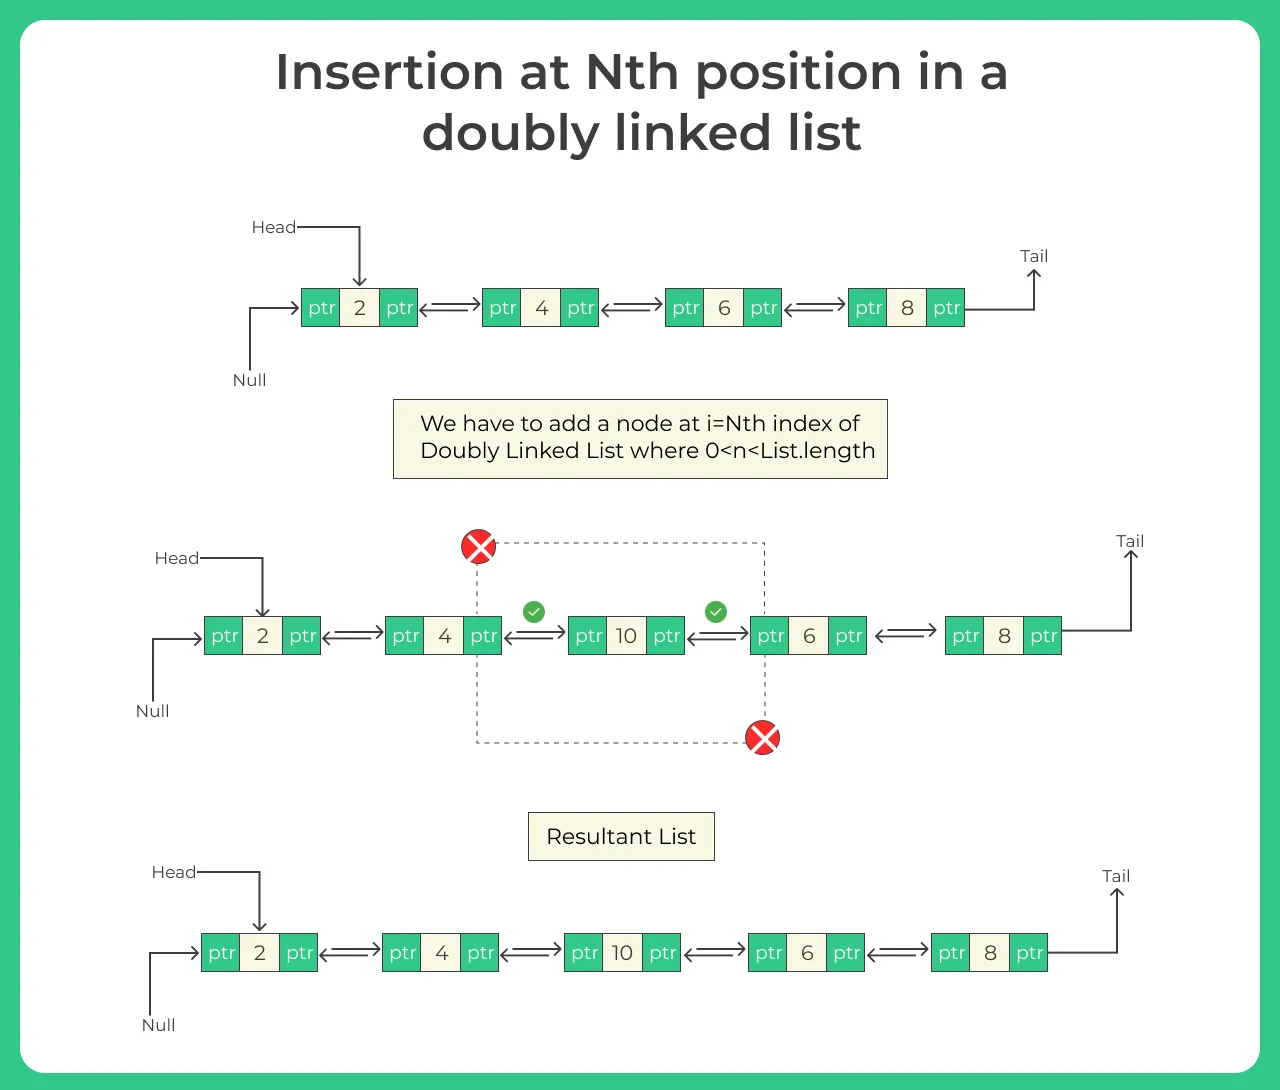 Insertion at Nth position in a doubly linked list